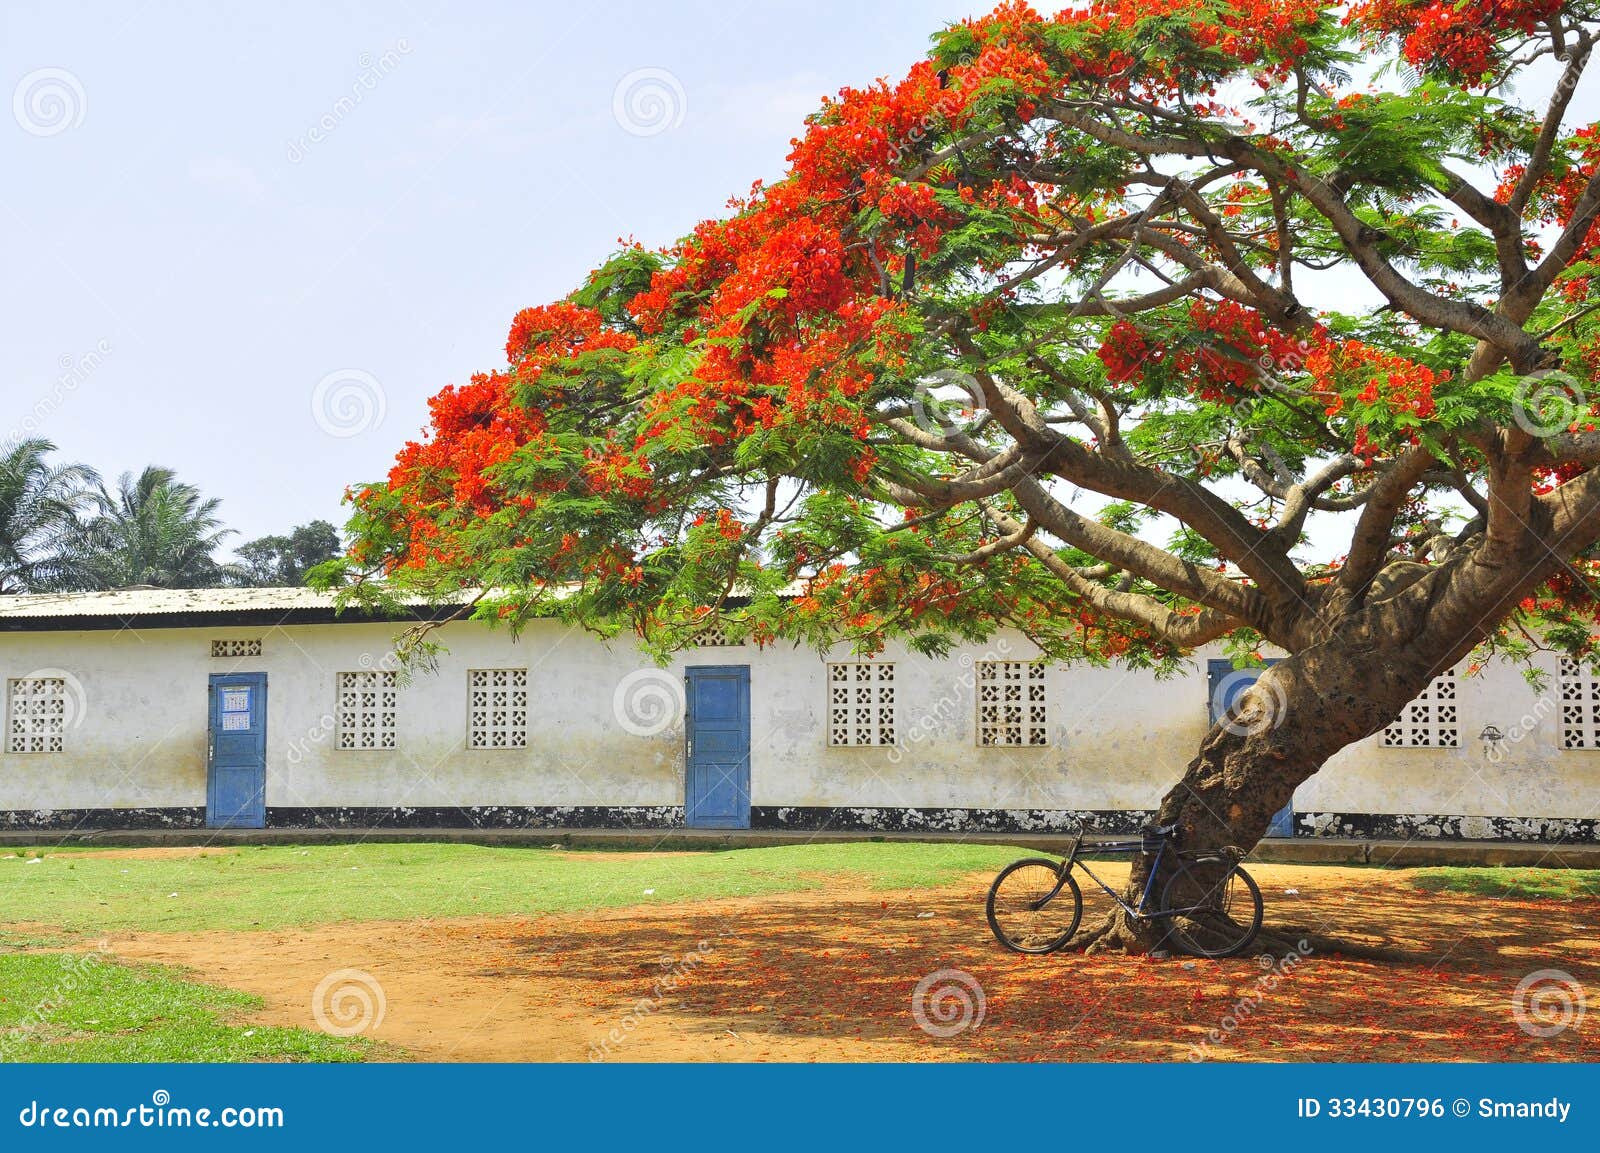 bicycle under a flamboyant tree in courtyard of a school